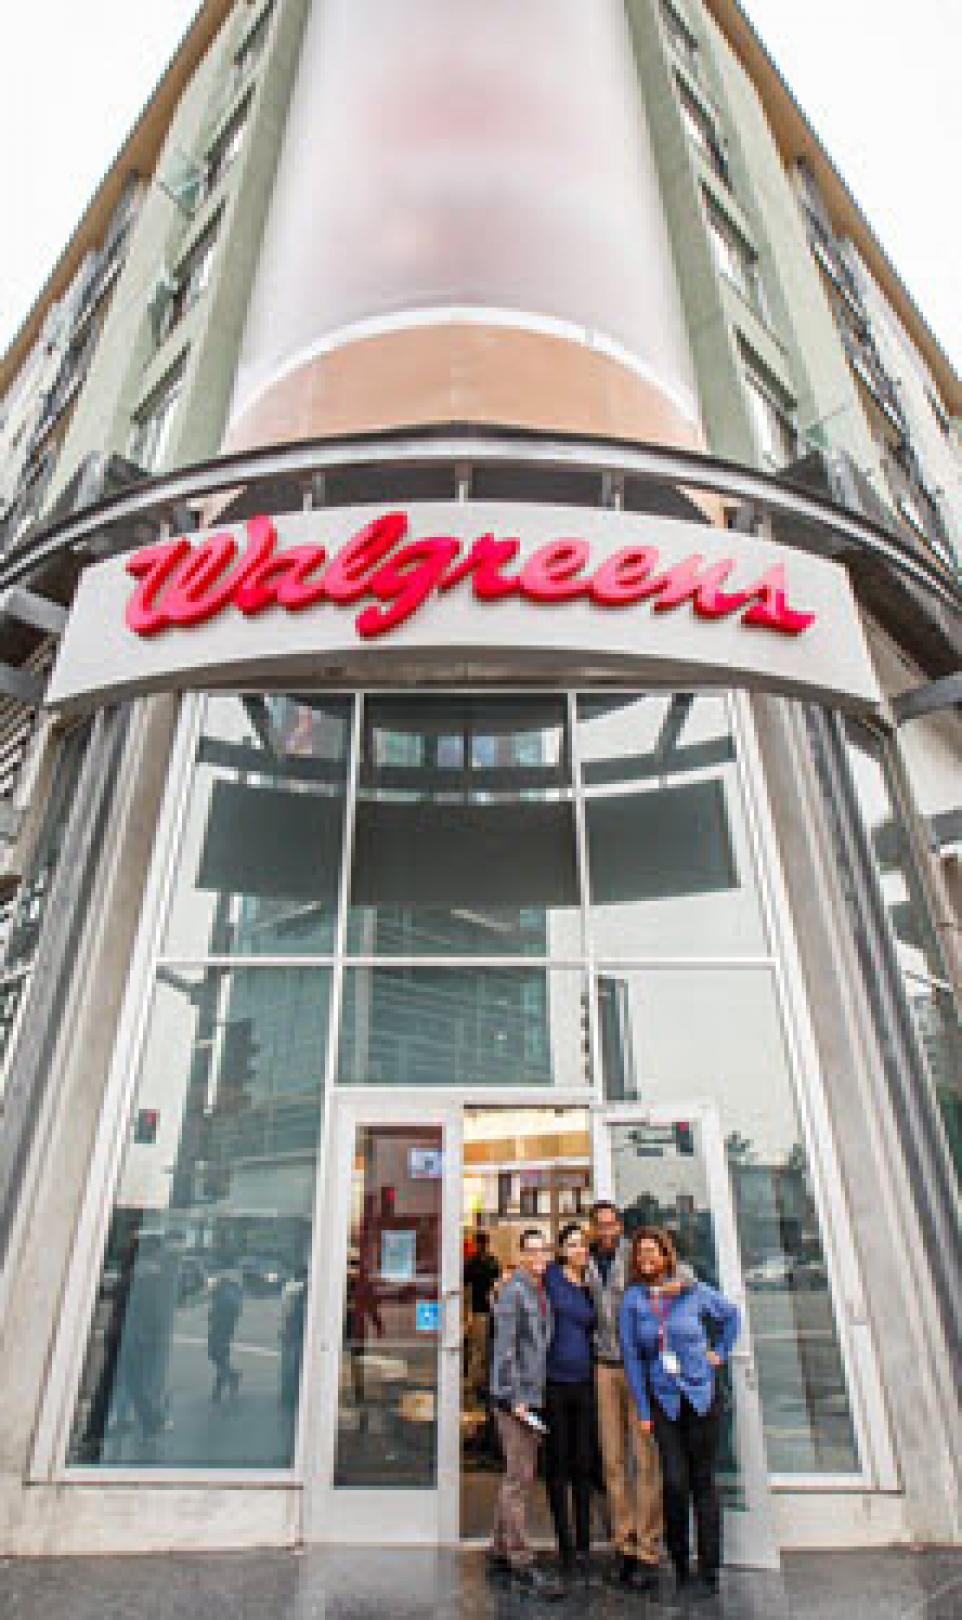 Storefront photograph of the Walgreens Hollywood store